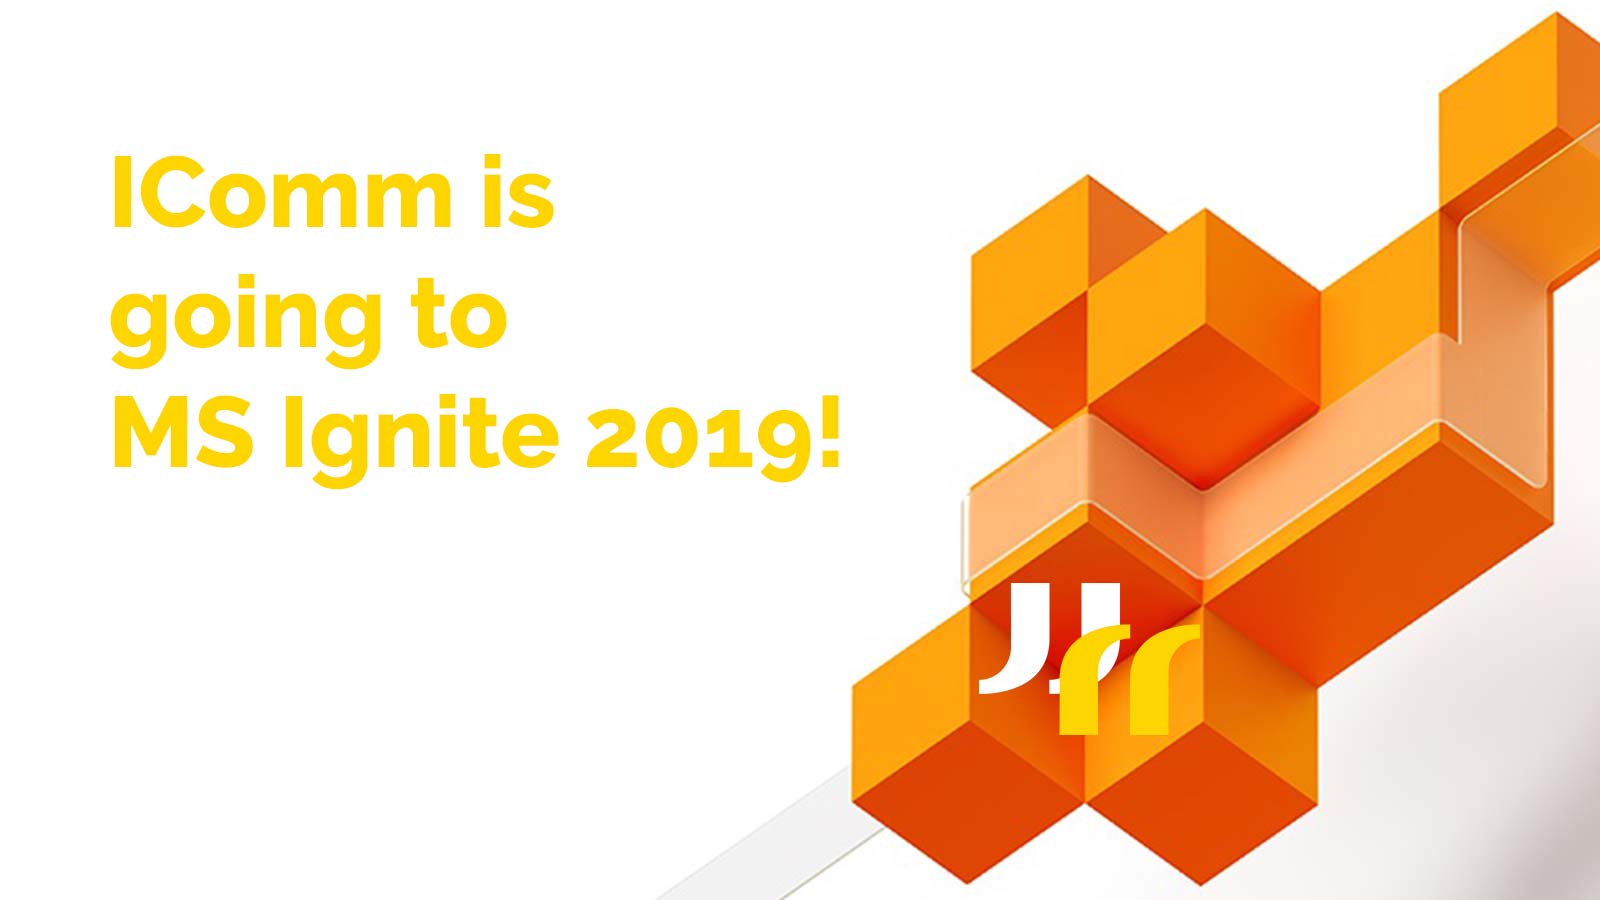 white background with abstract orange 3d shape, IComm logo mark, and text saying "IComm is going to MS Ignite 2019!"